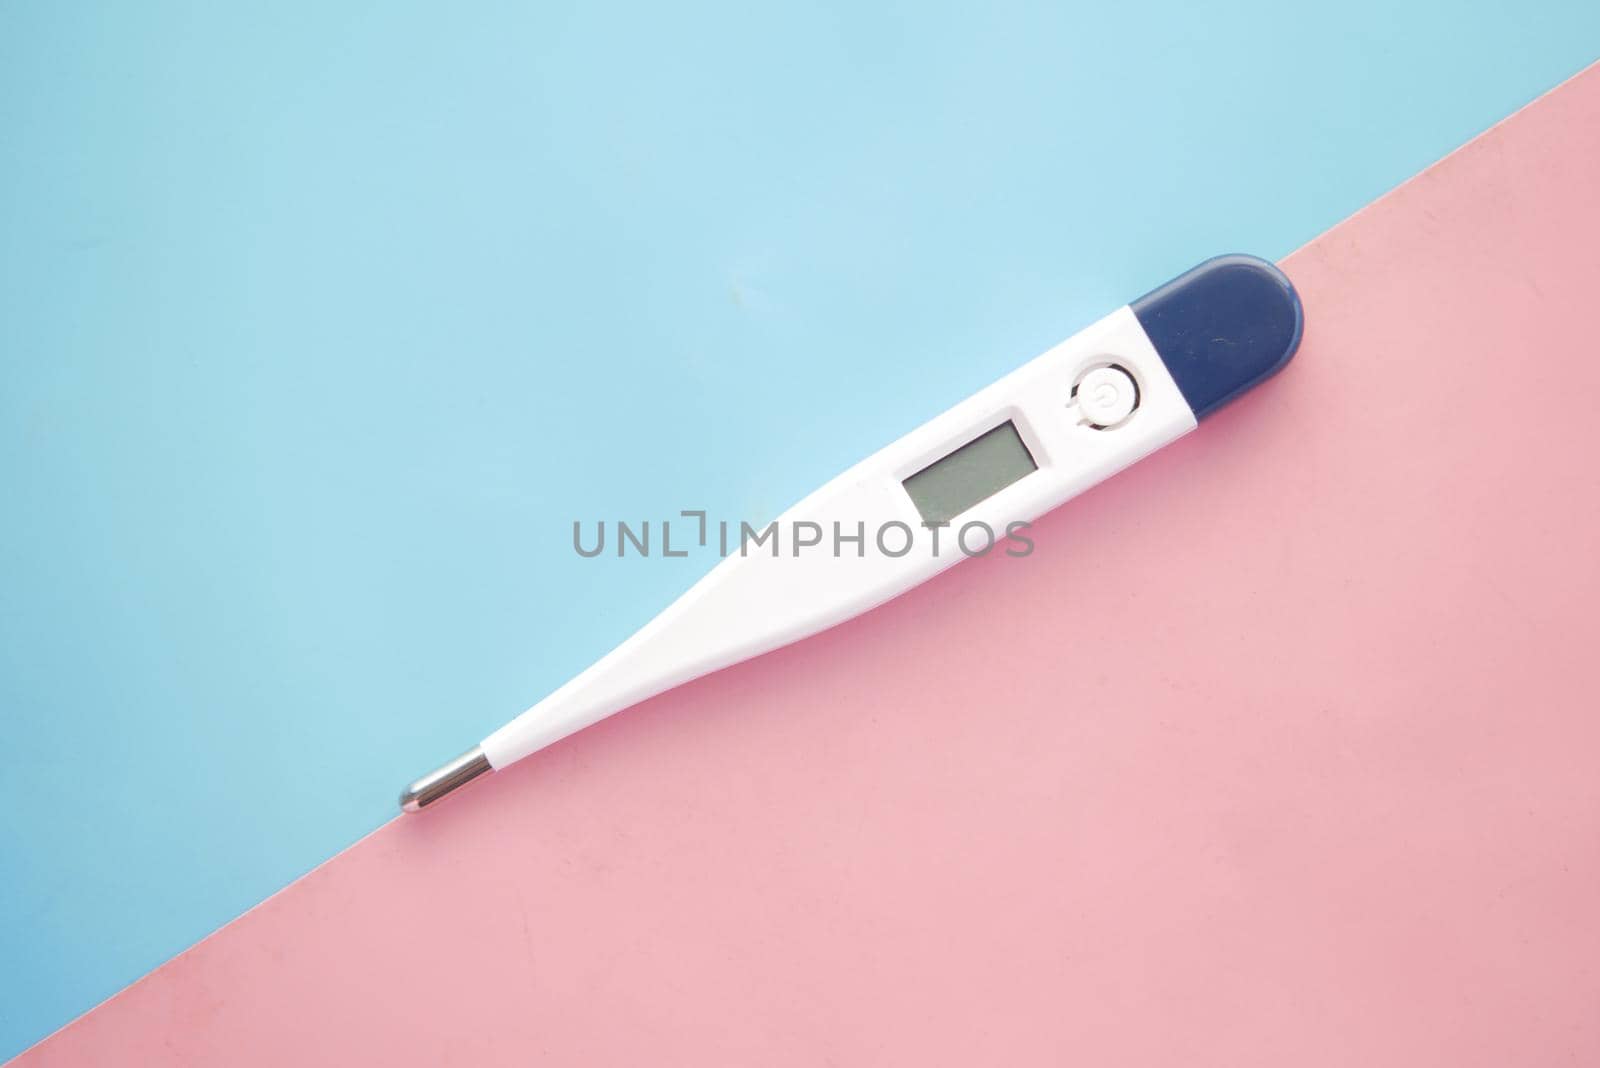 digital thermometer on pink background with copy space by towfiq007